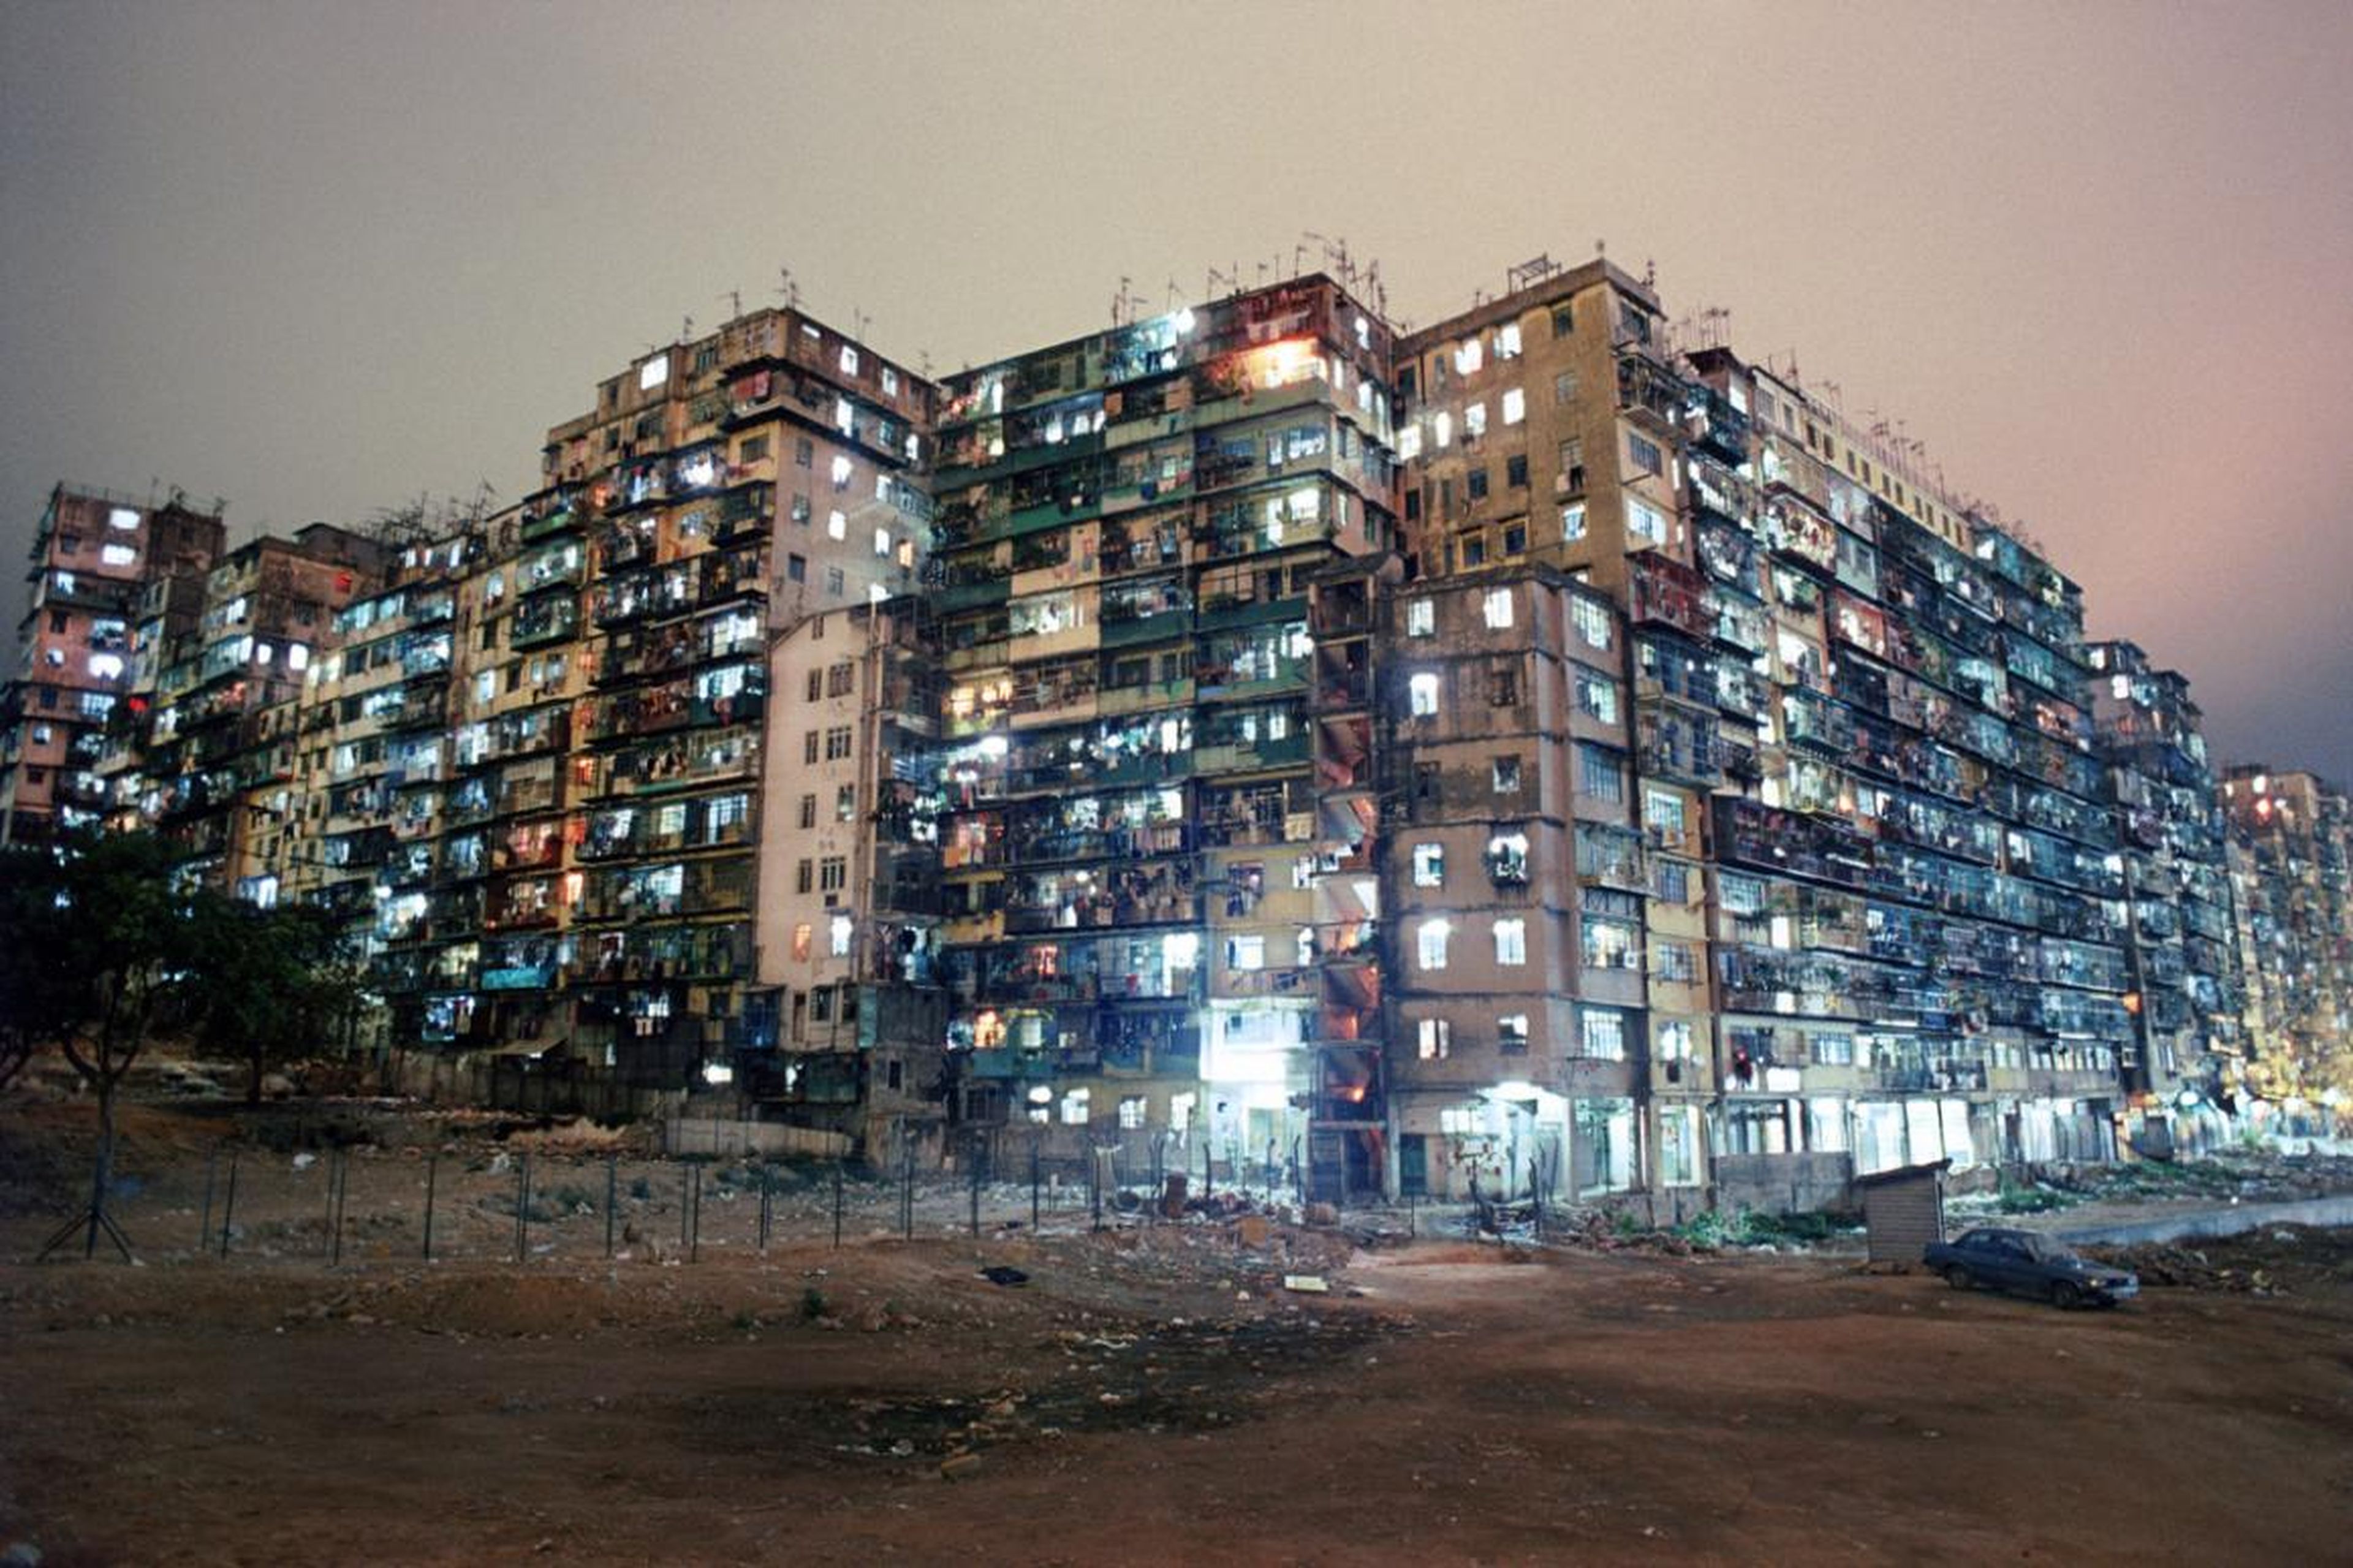 Kowloon Walled City was a densely populated, ungoverned settlement in Kowloon, an area north of Hong Kong Island. What began as a Chinese military fort evolved into a squatters' village comprising a mass of 300 interconnected high